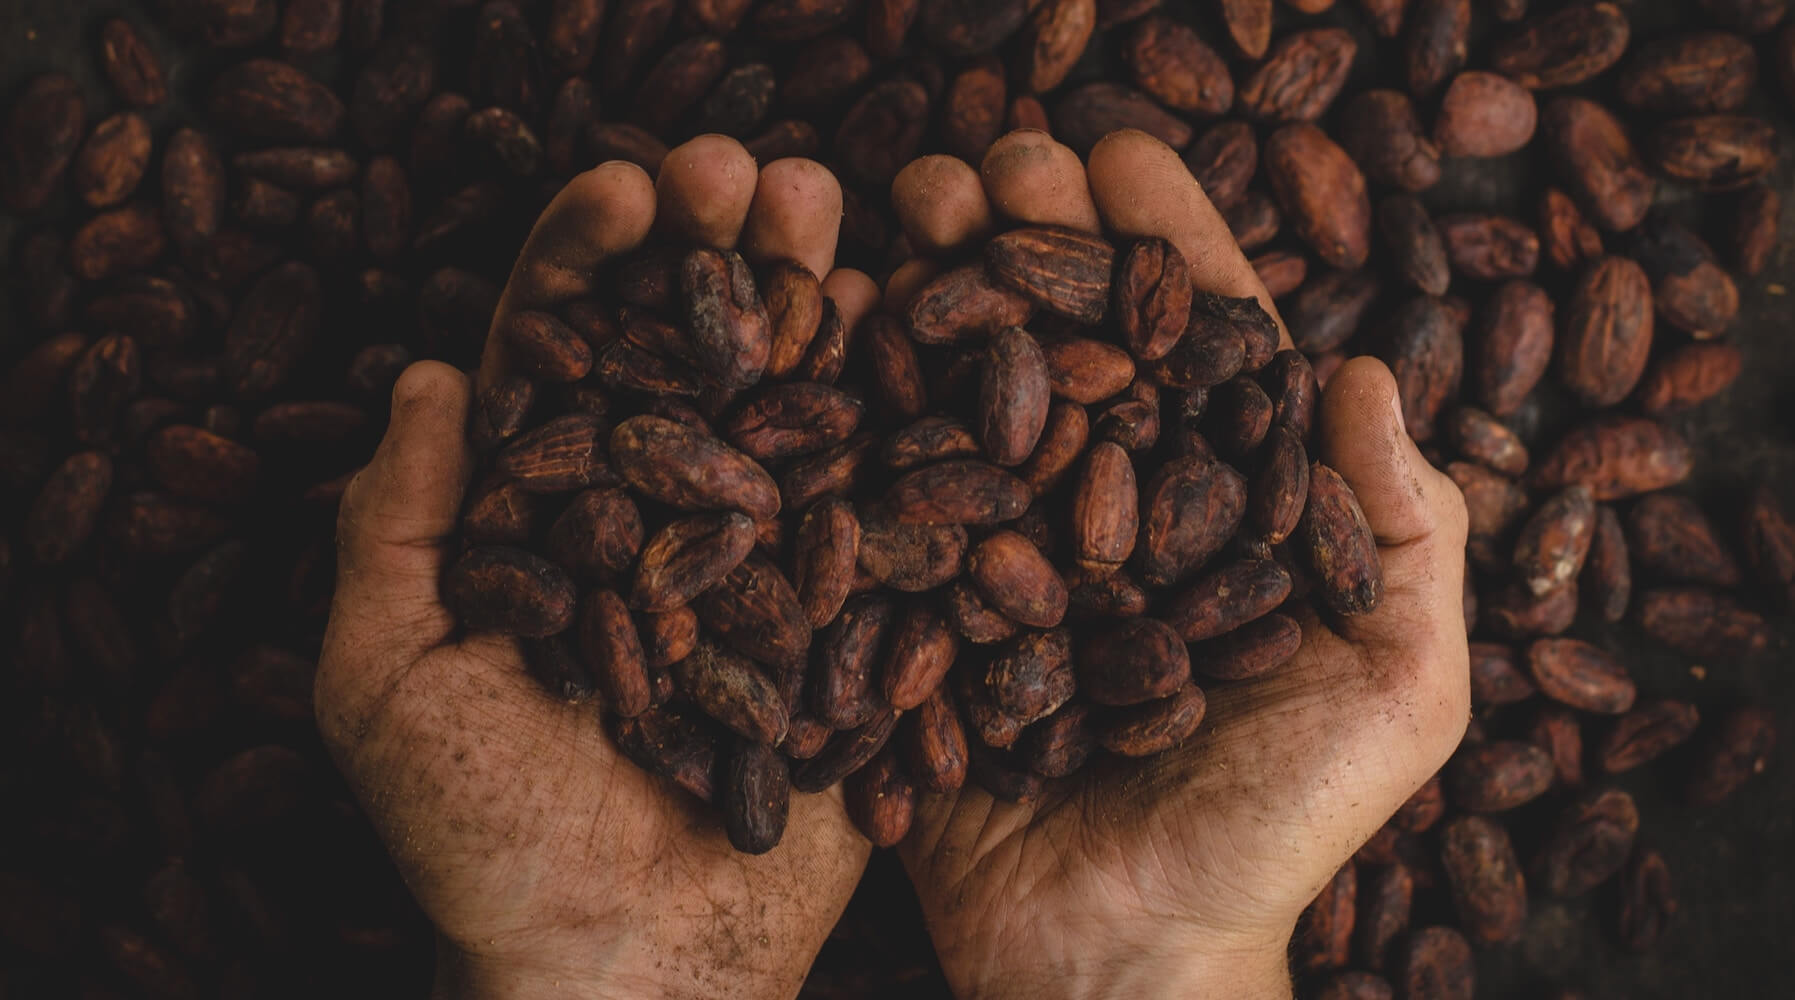 Removing Child Labor, Deforestation, and Poverty from the Cost of Chocolate